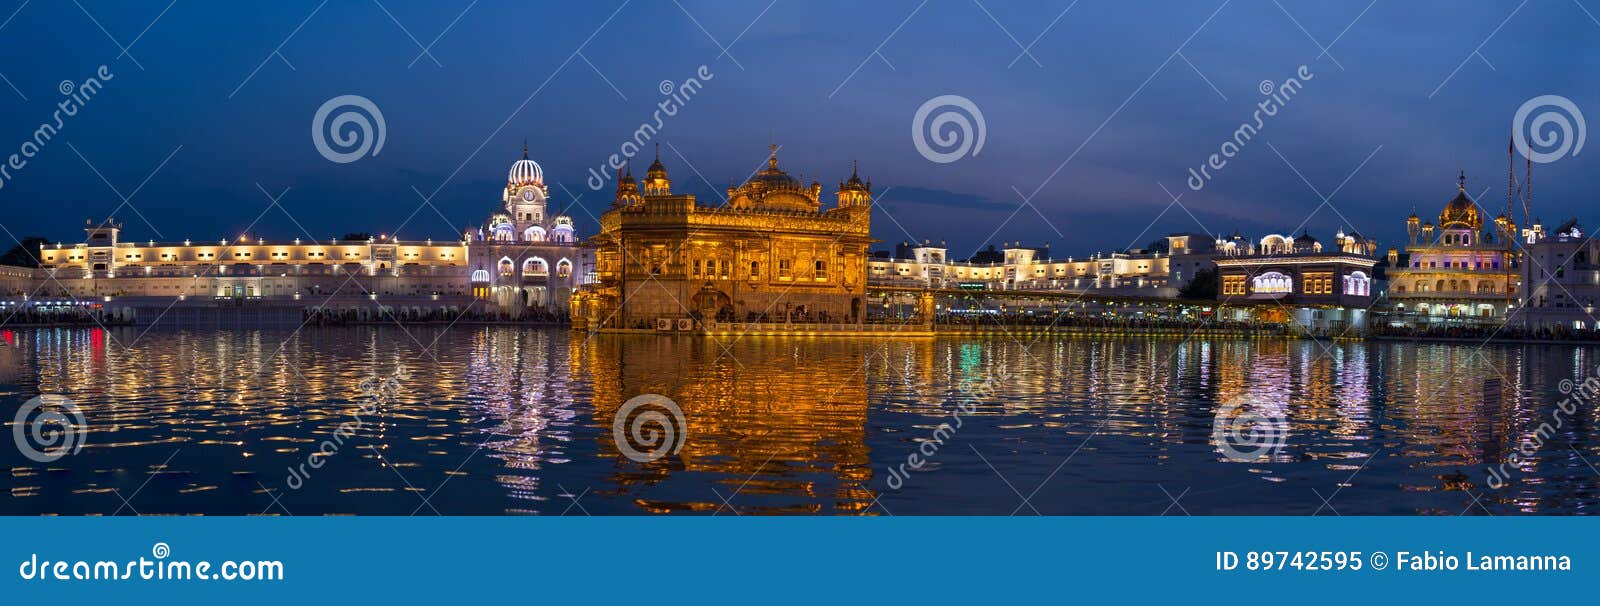 the golden temple at amritsar, punjab, india, the most sacred icon and worship place of sikh religion. illuminated in the night, r